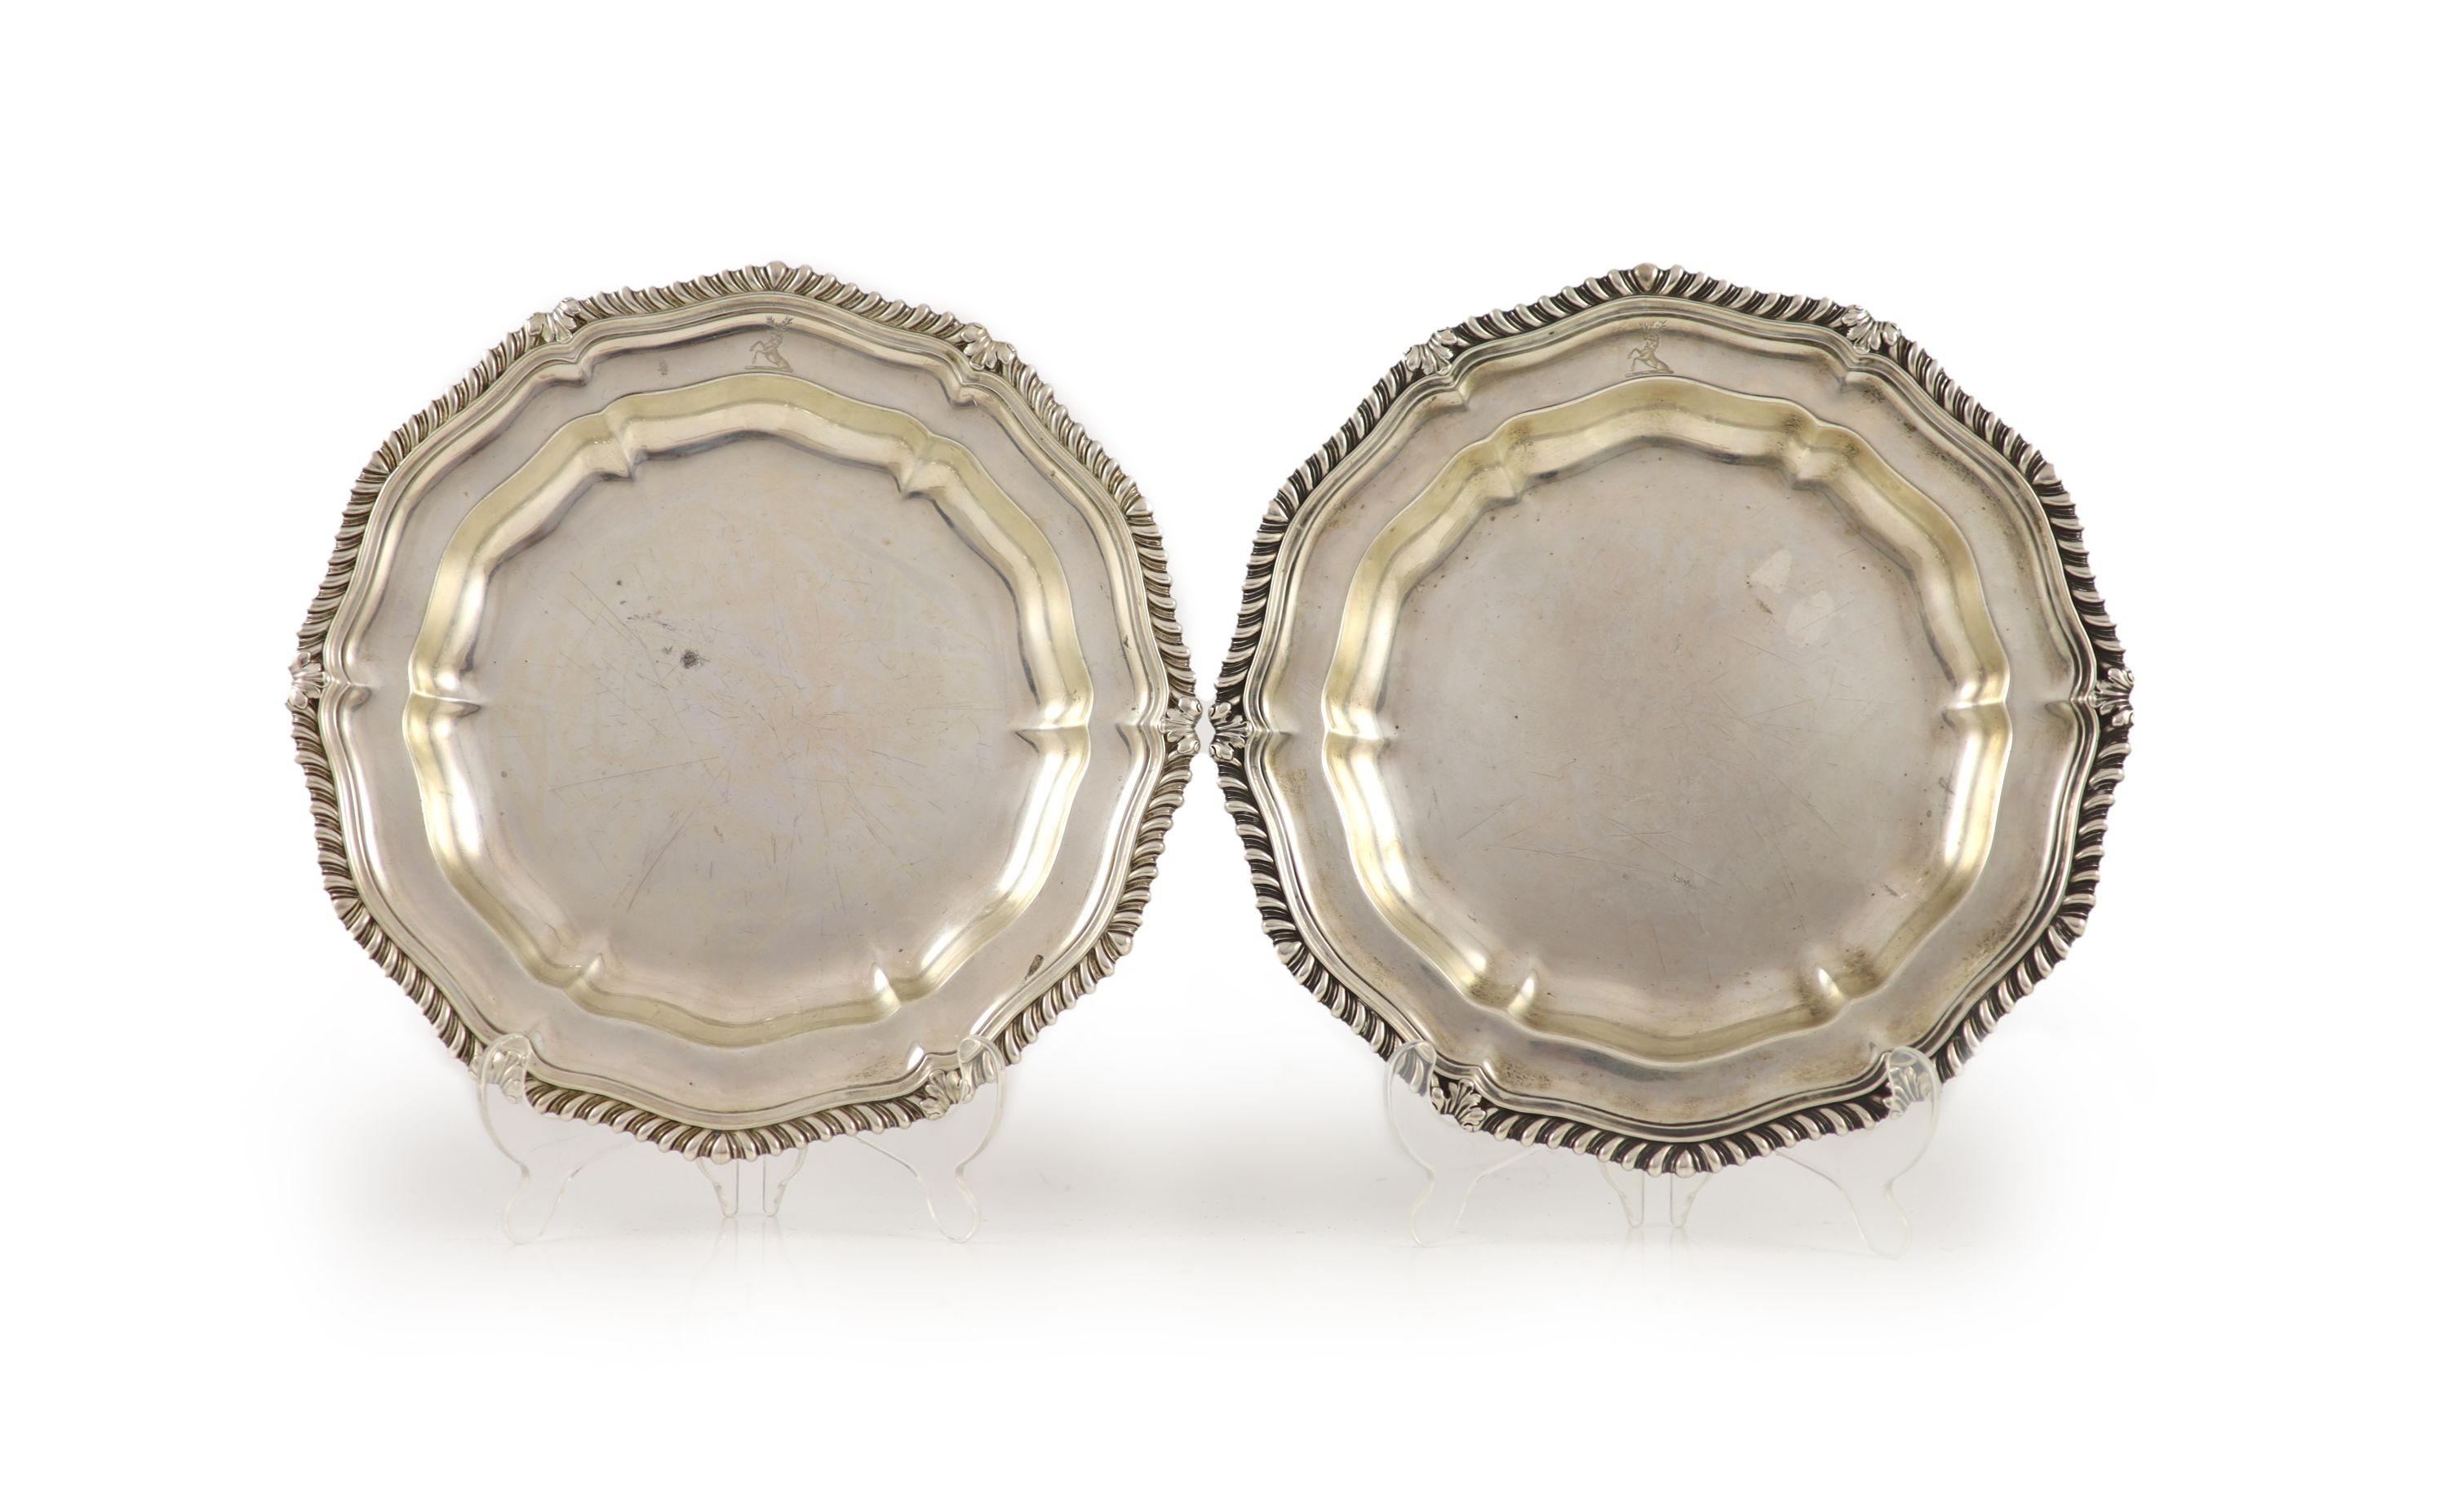 A pair of late George IV silver shaped circular dinner plates by Paul Storr